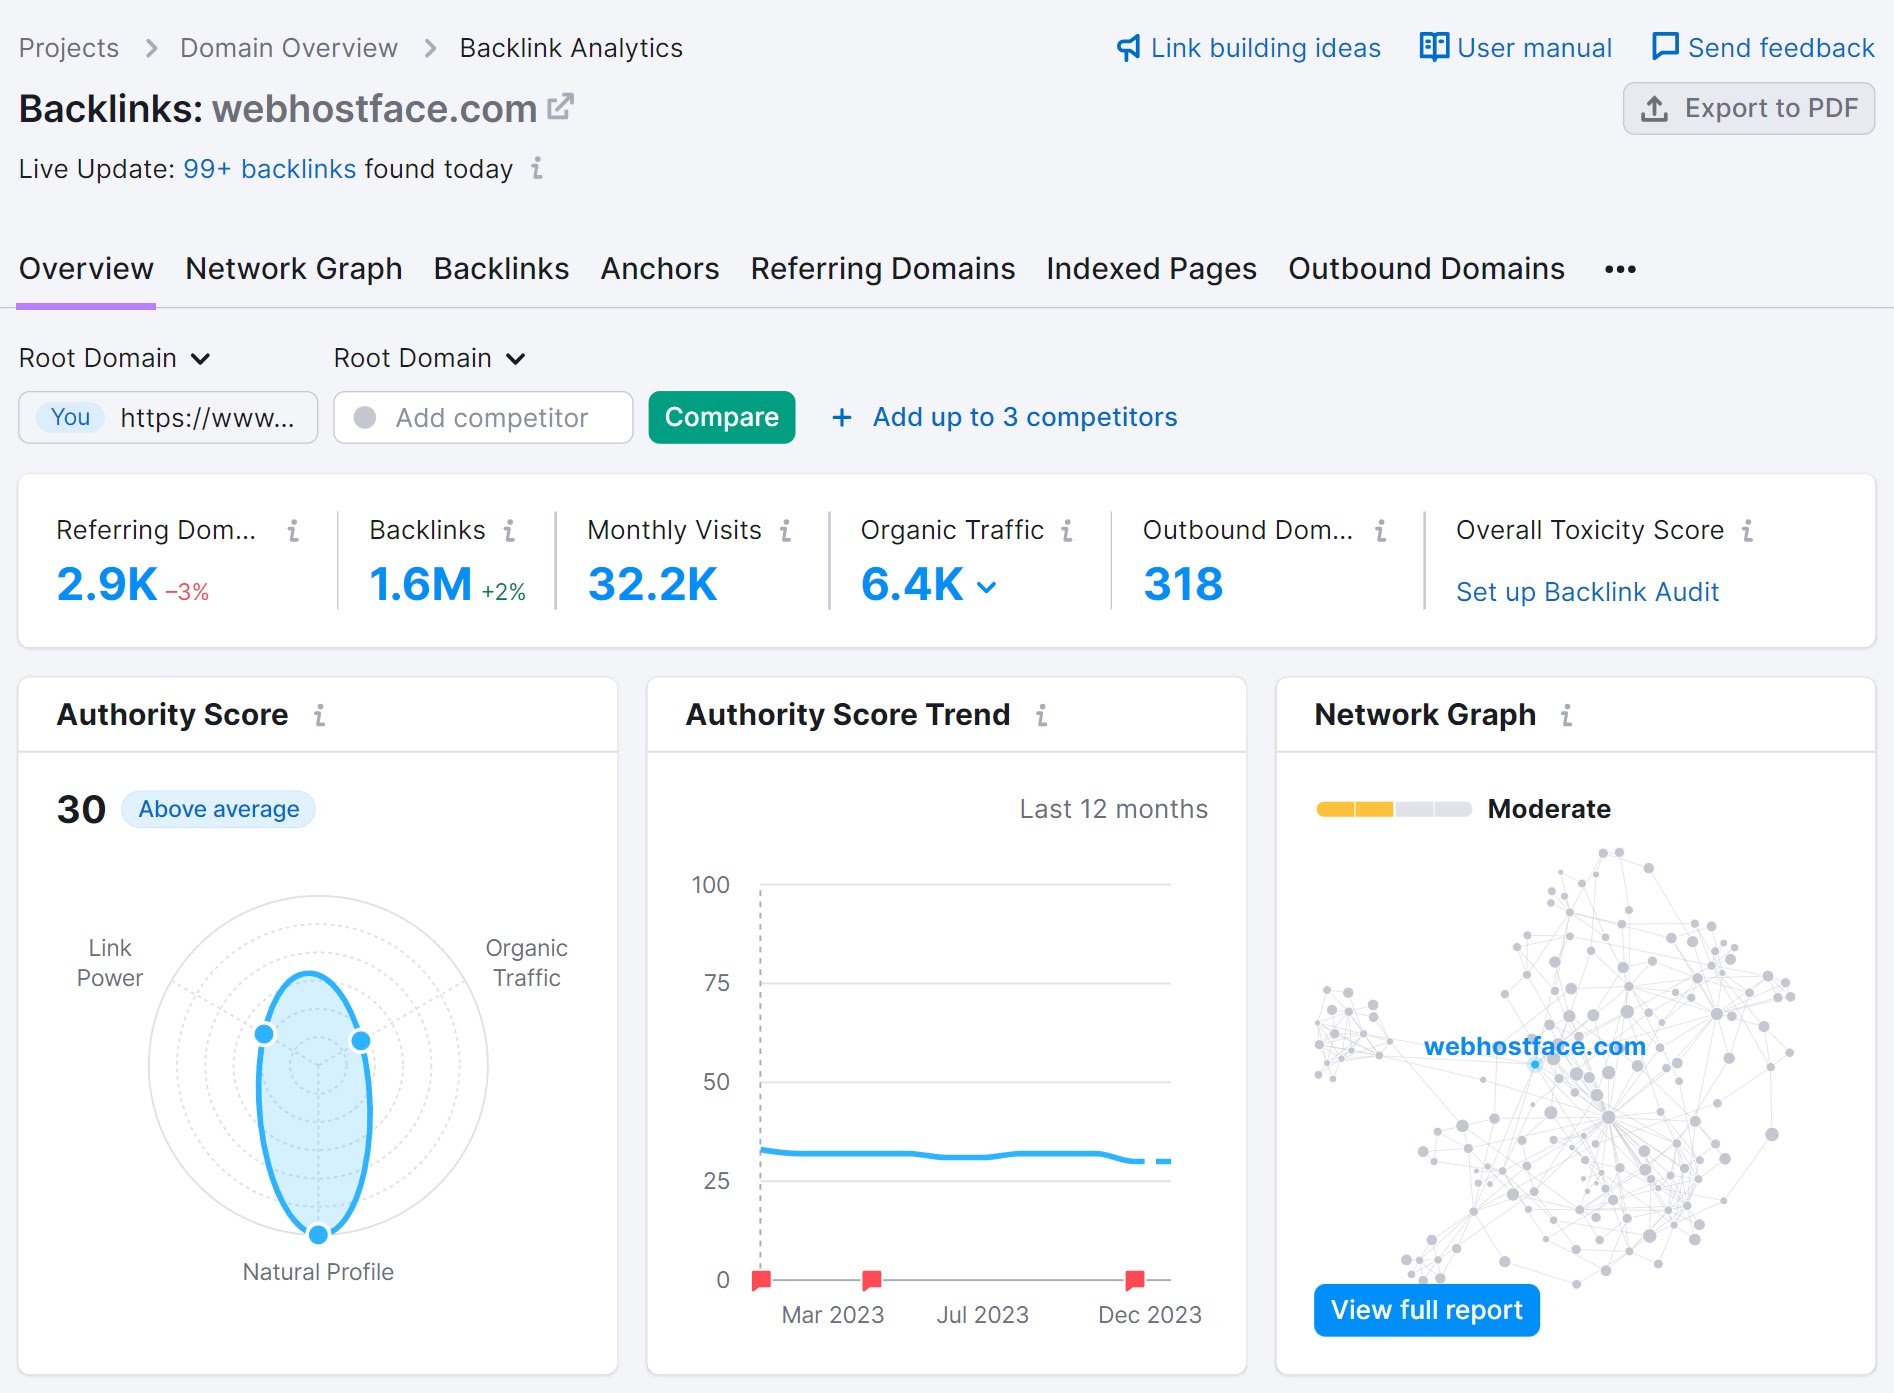 Backlink Analytics report for a competitor